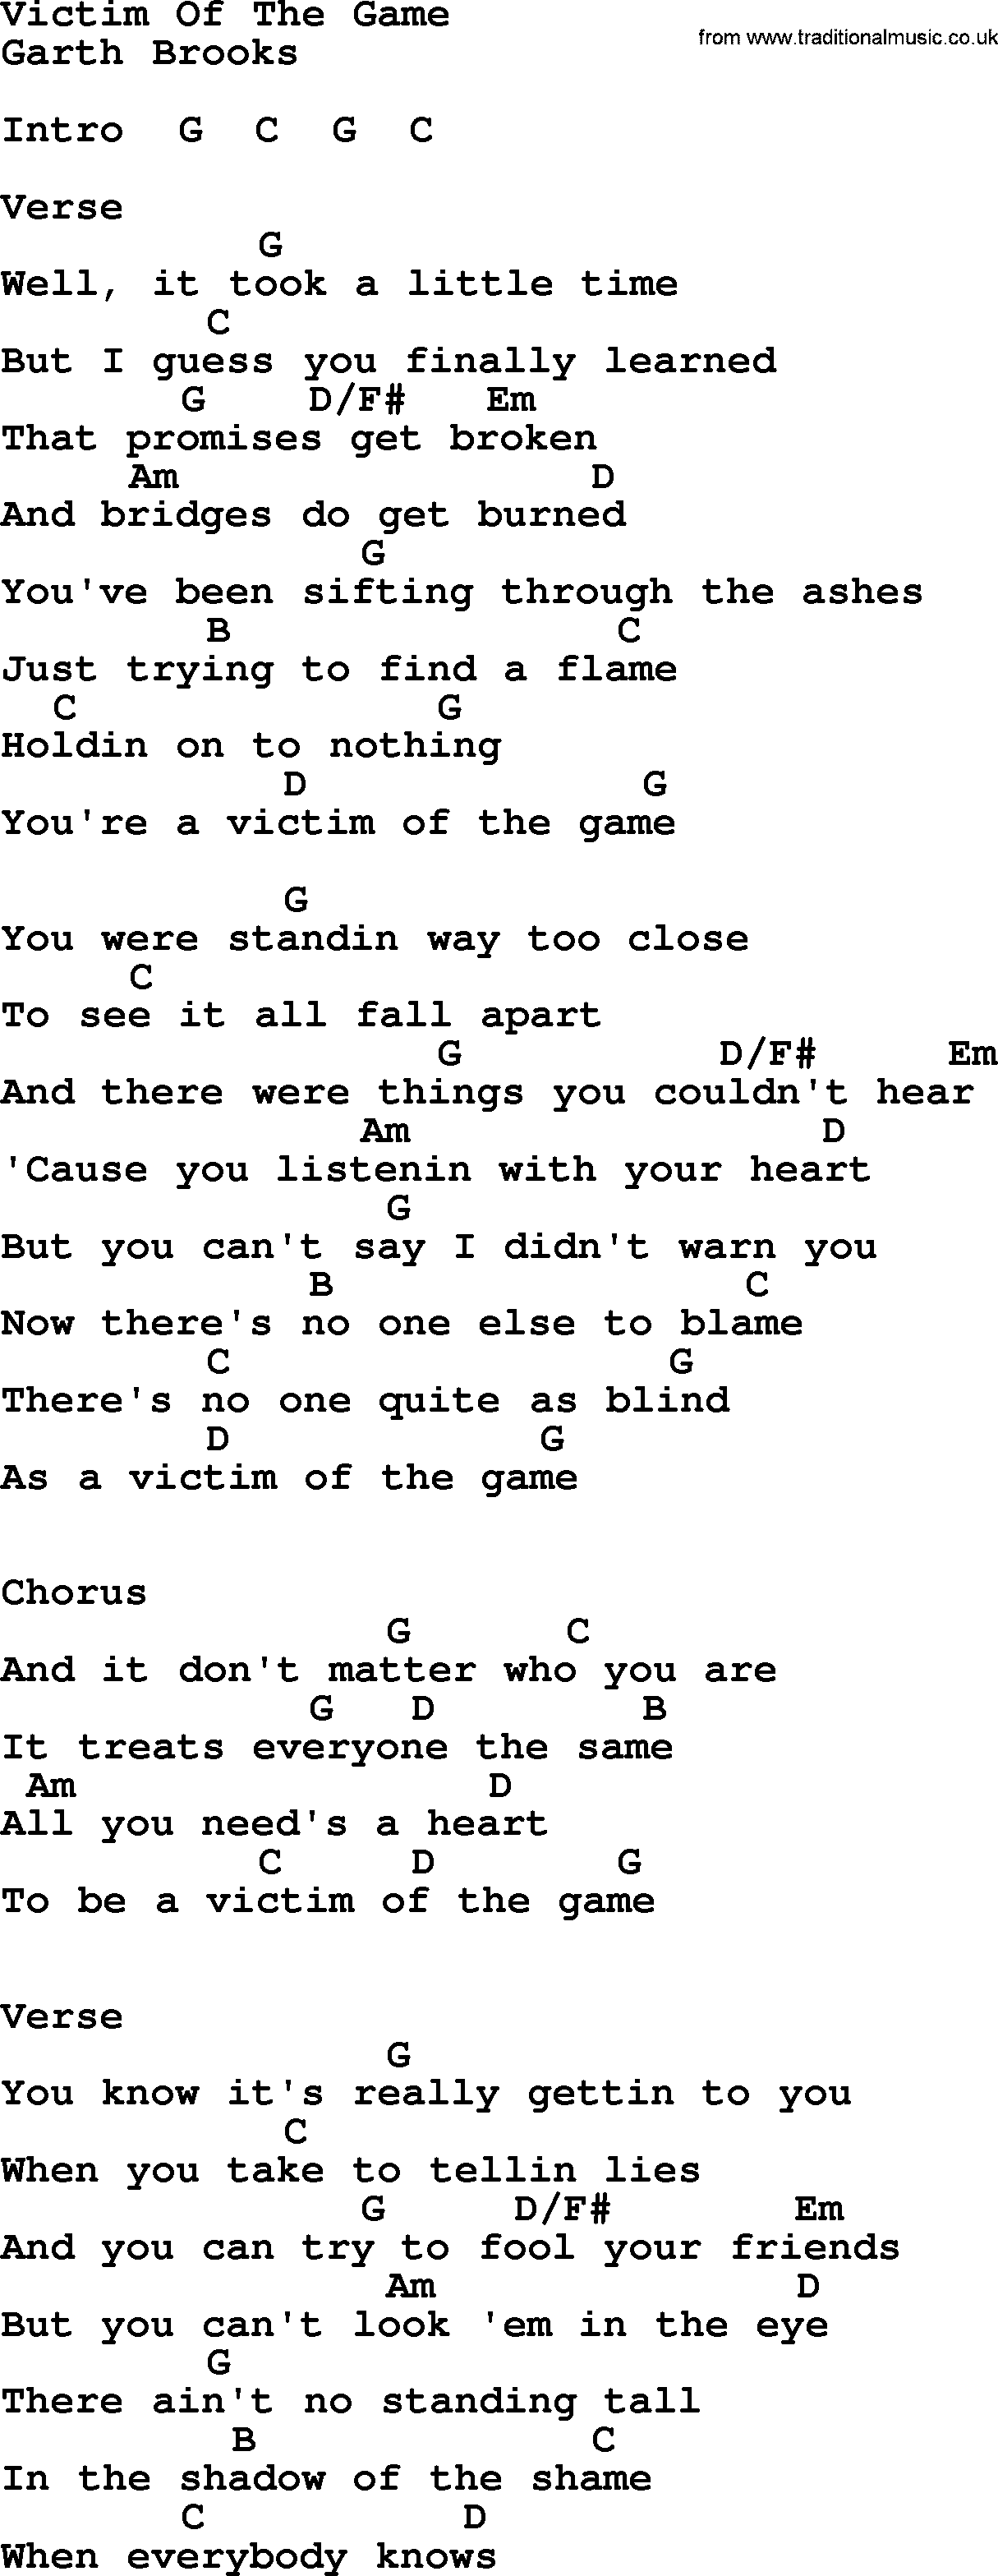 Garth Brooks song: Victim Of The Game, lyrics and chords